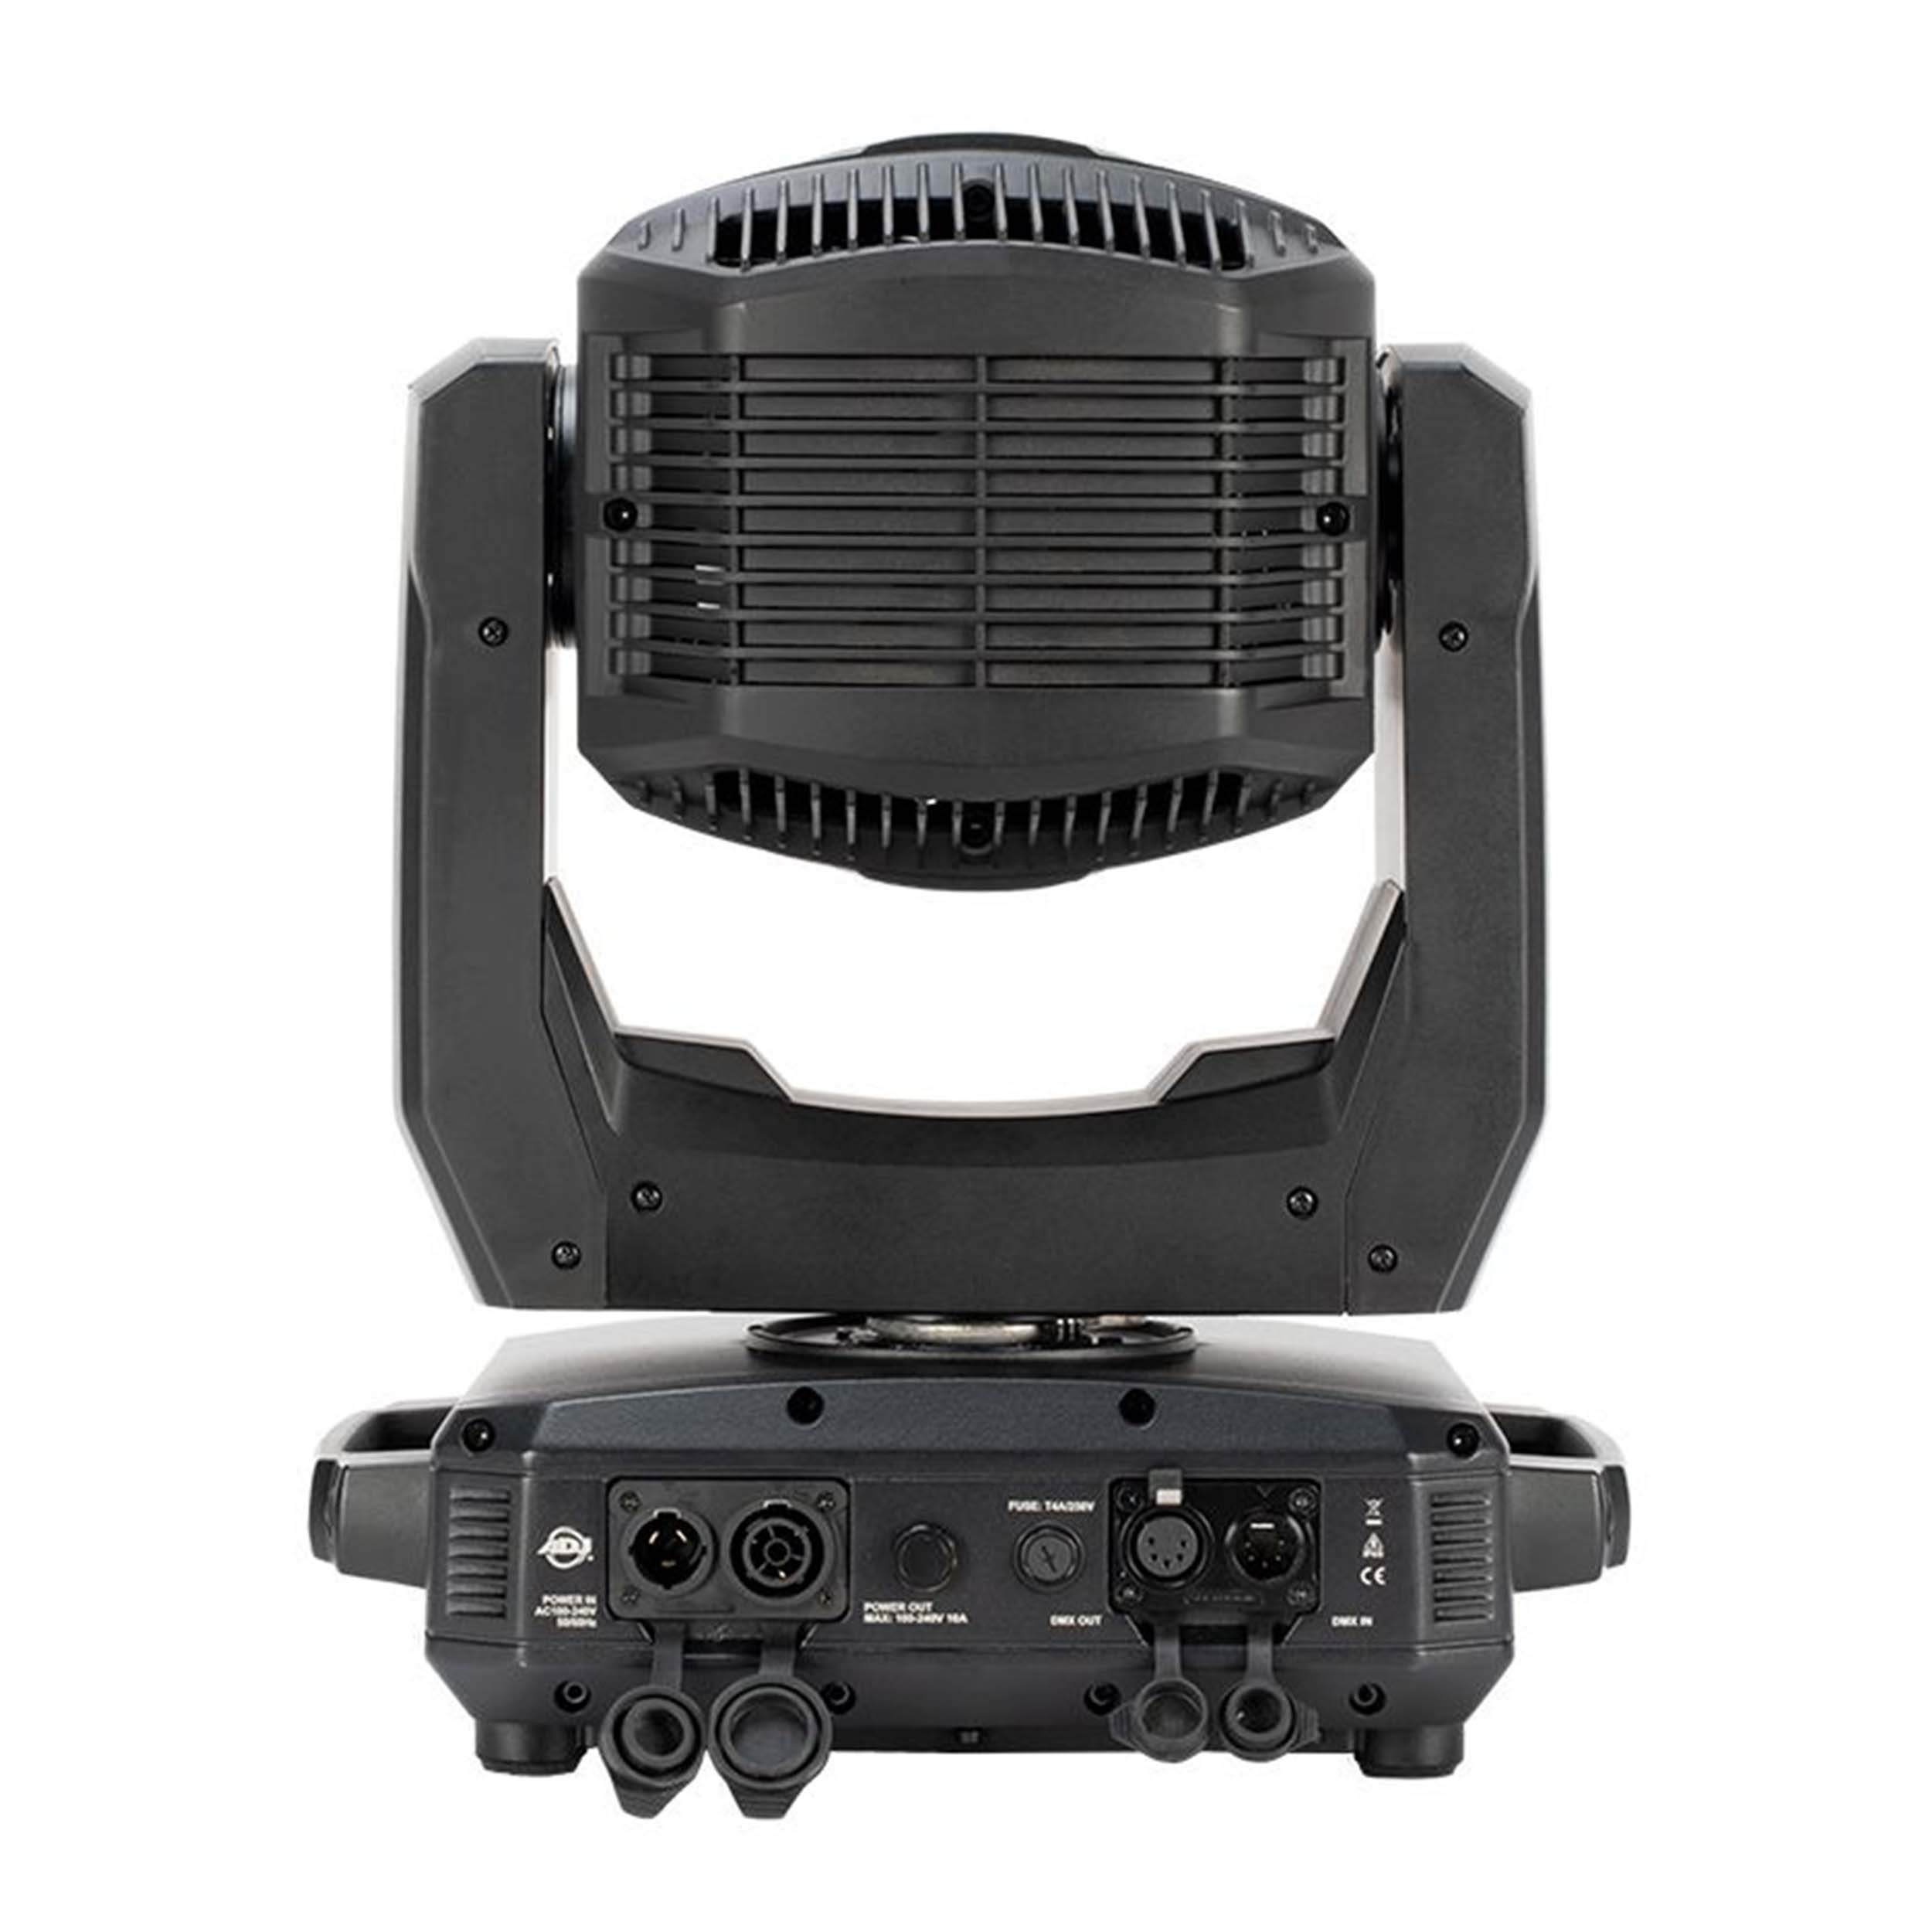 ADJ Hydro Spot 2, IP65-Rated Professional Moving Head Luminaire with 320-Watt Cool White LED Engine by ADJ